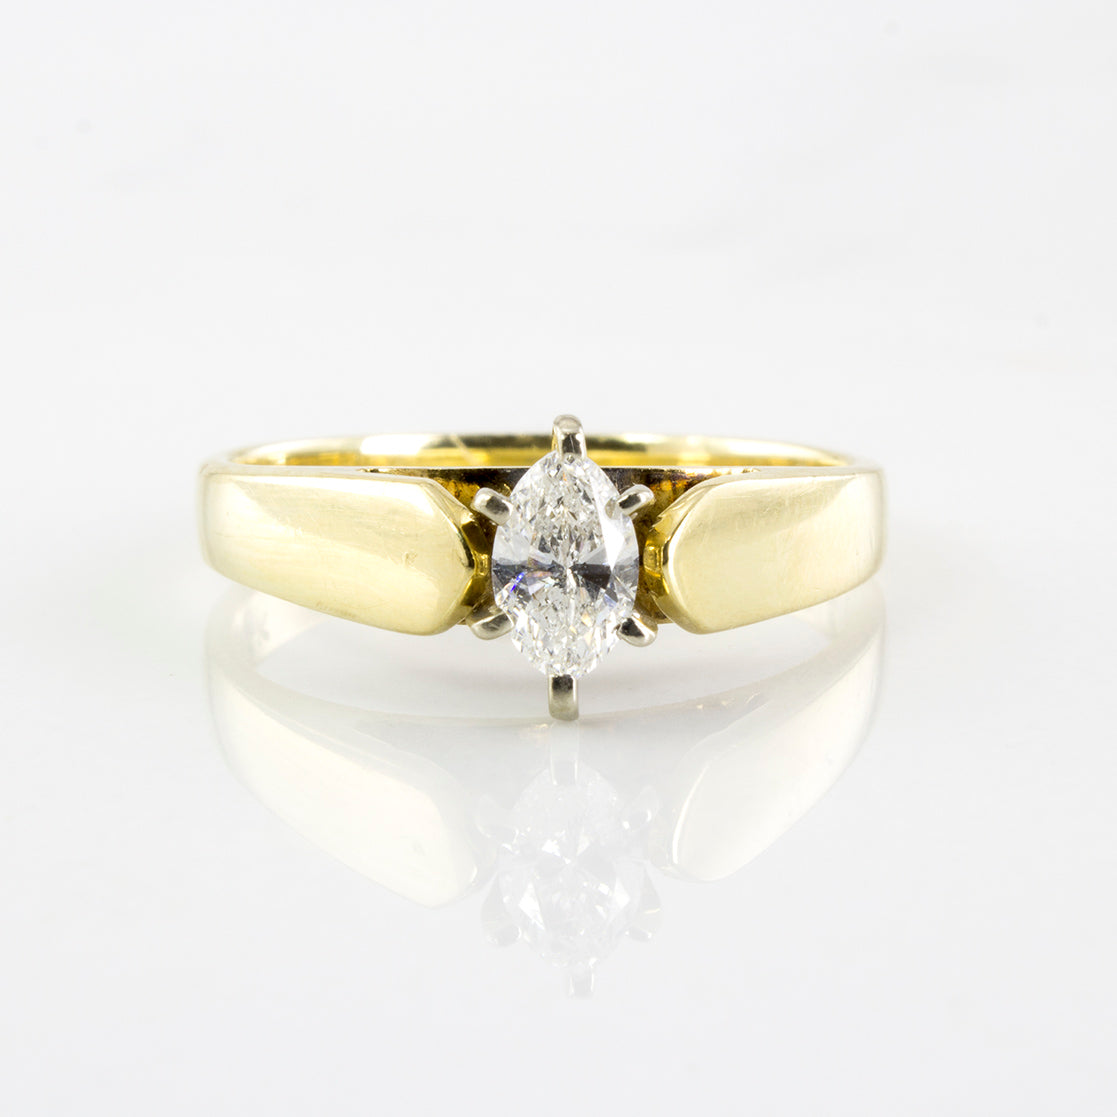 Marquise Cut Solitaire Diamond Ring | 0.35 ctw | SZ 6.25 |